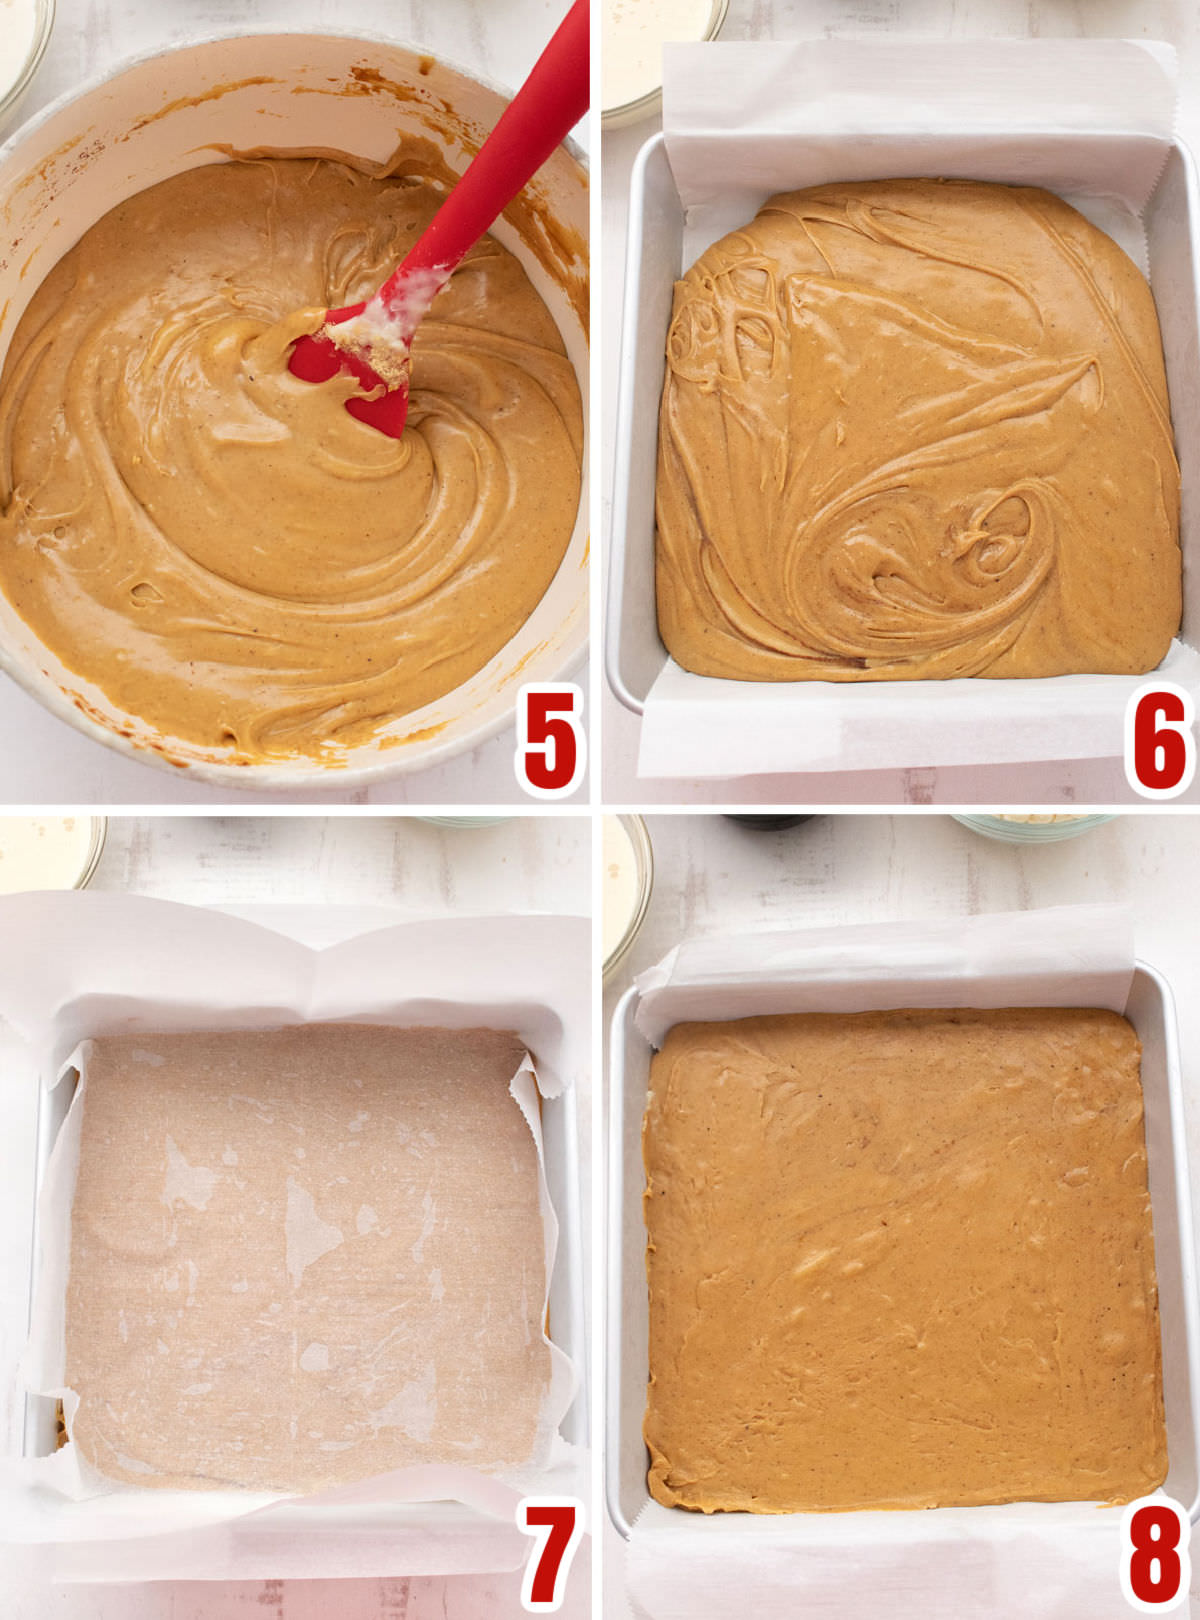 Collage image showing the steps for adding the Fudge mixture to an 8x8 pan to cool.